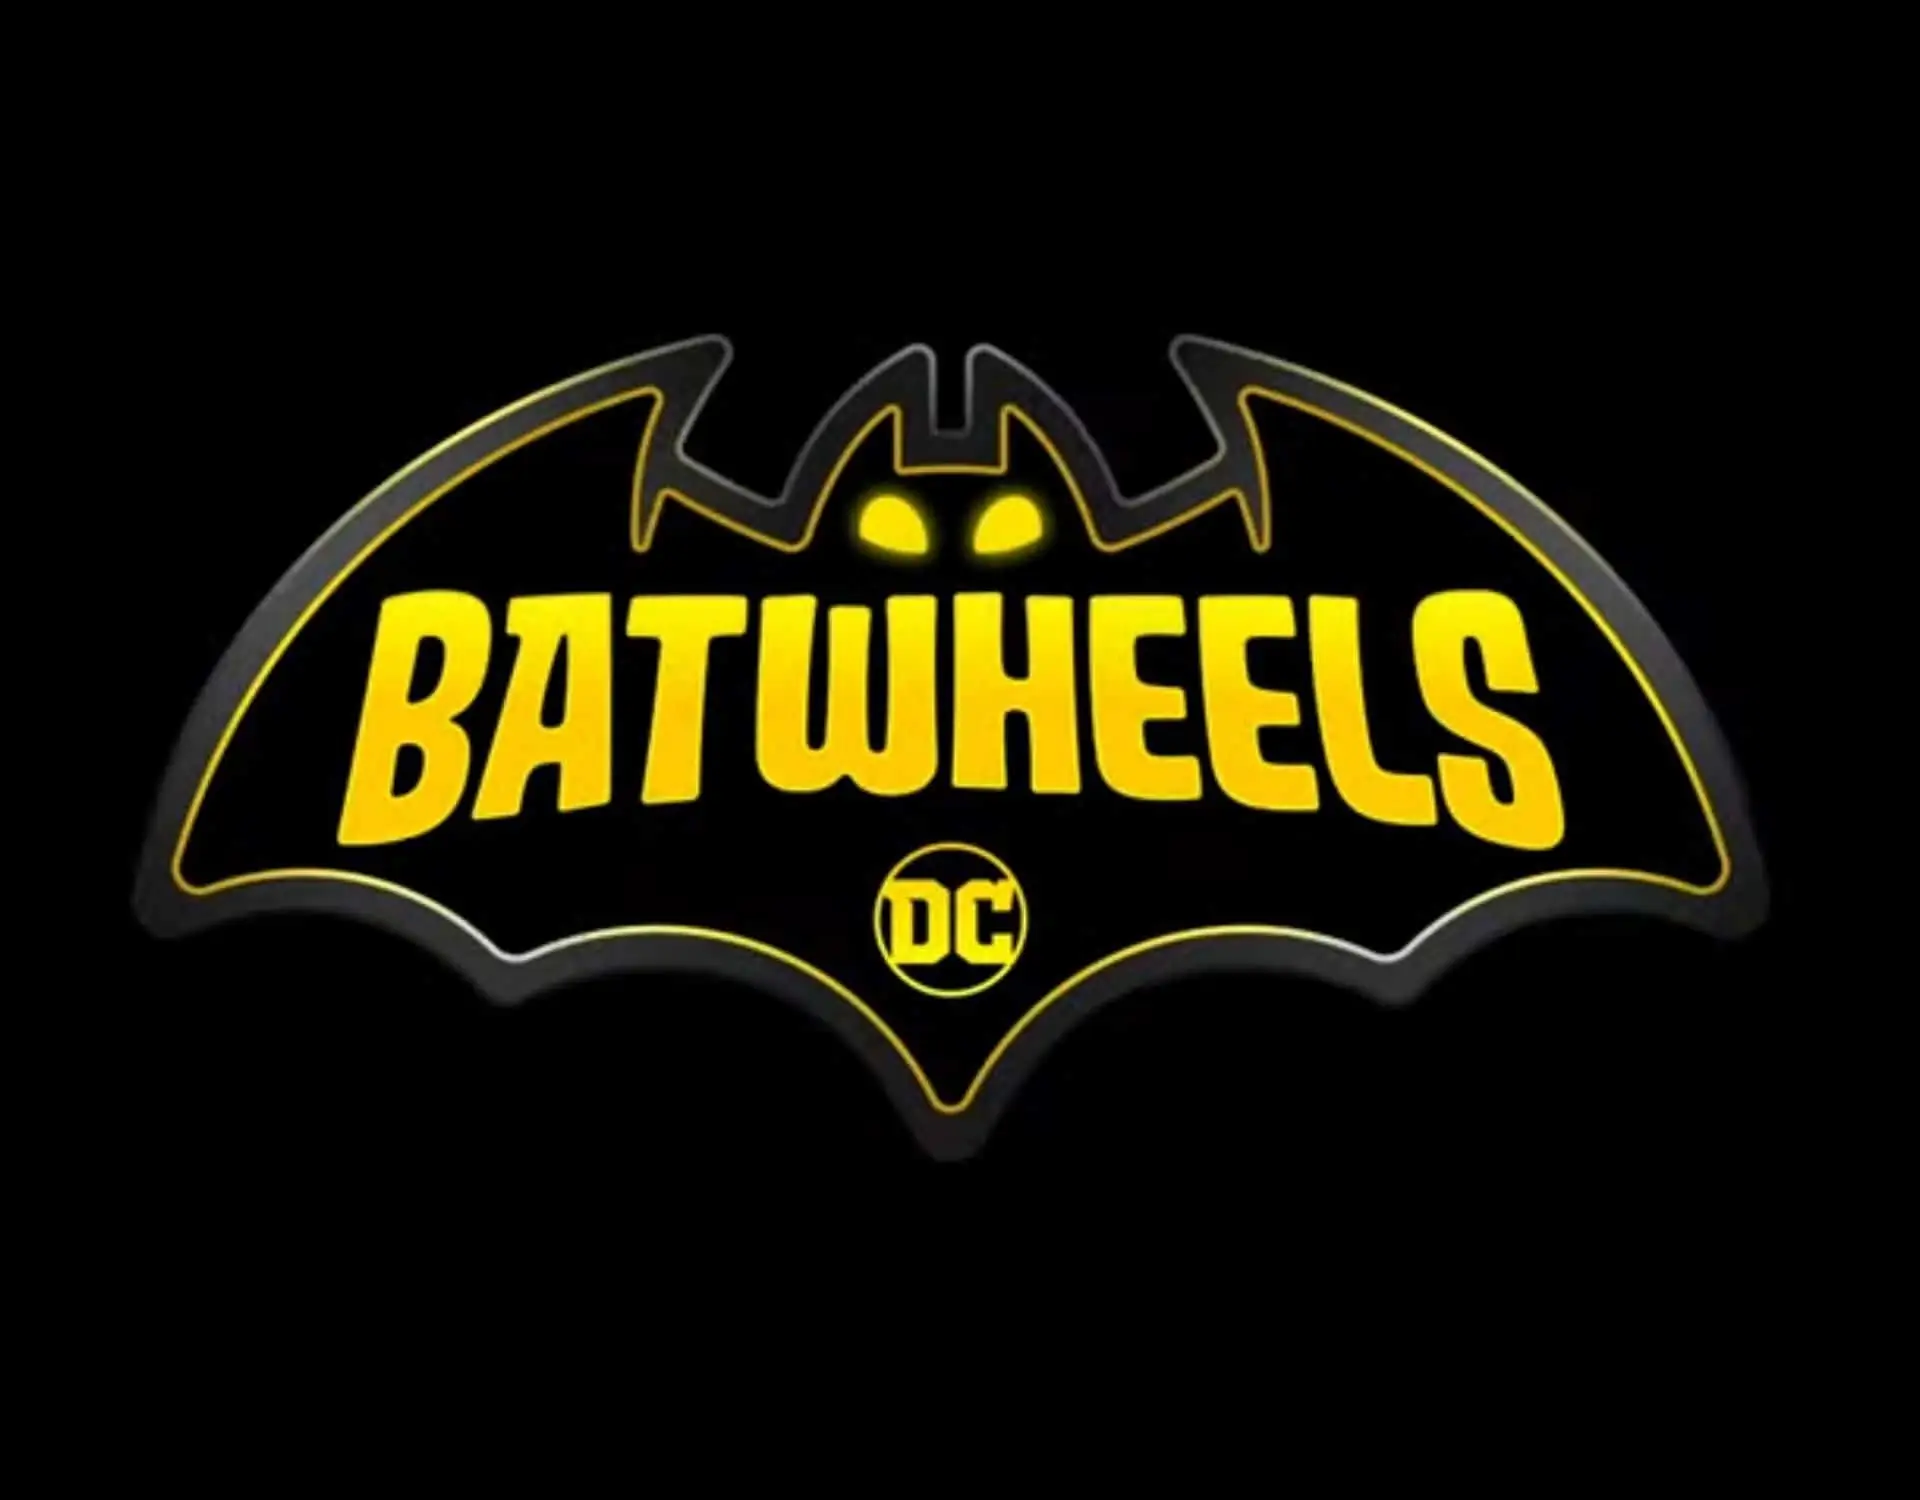 Everything You Need to Know About DC's “Batwheels” TV Show